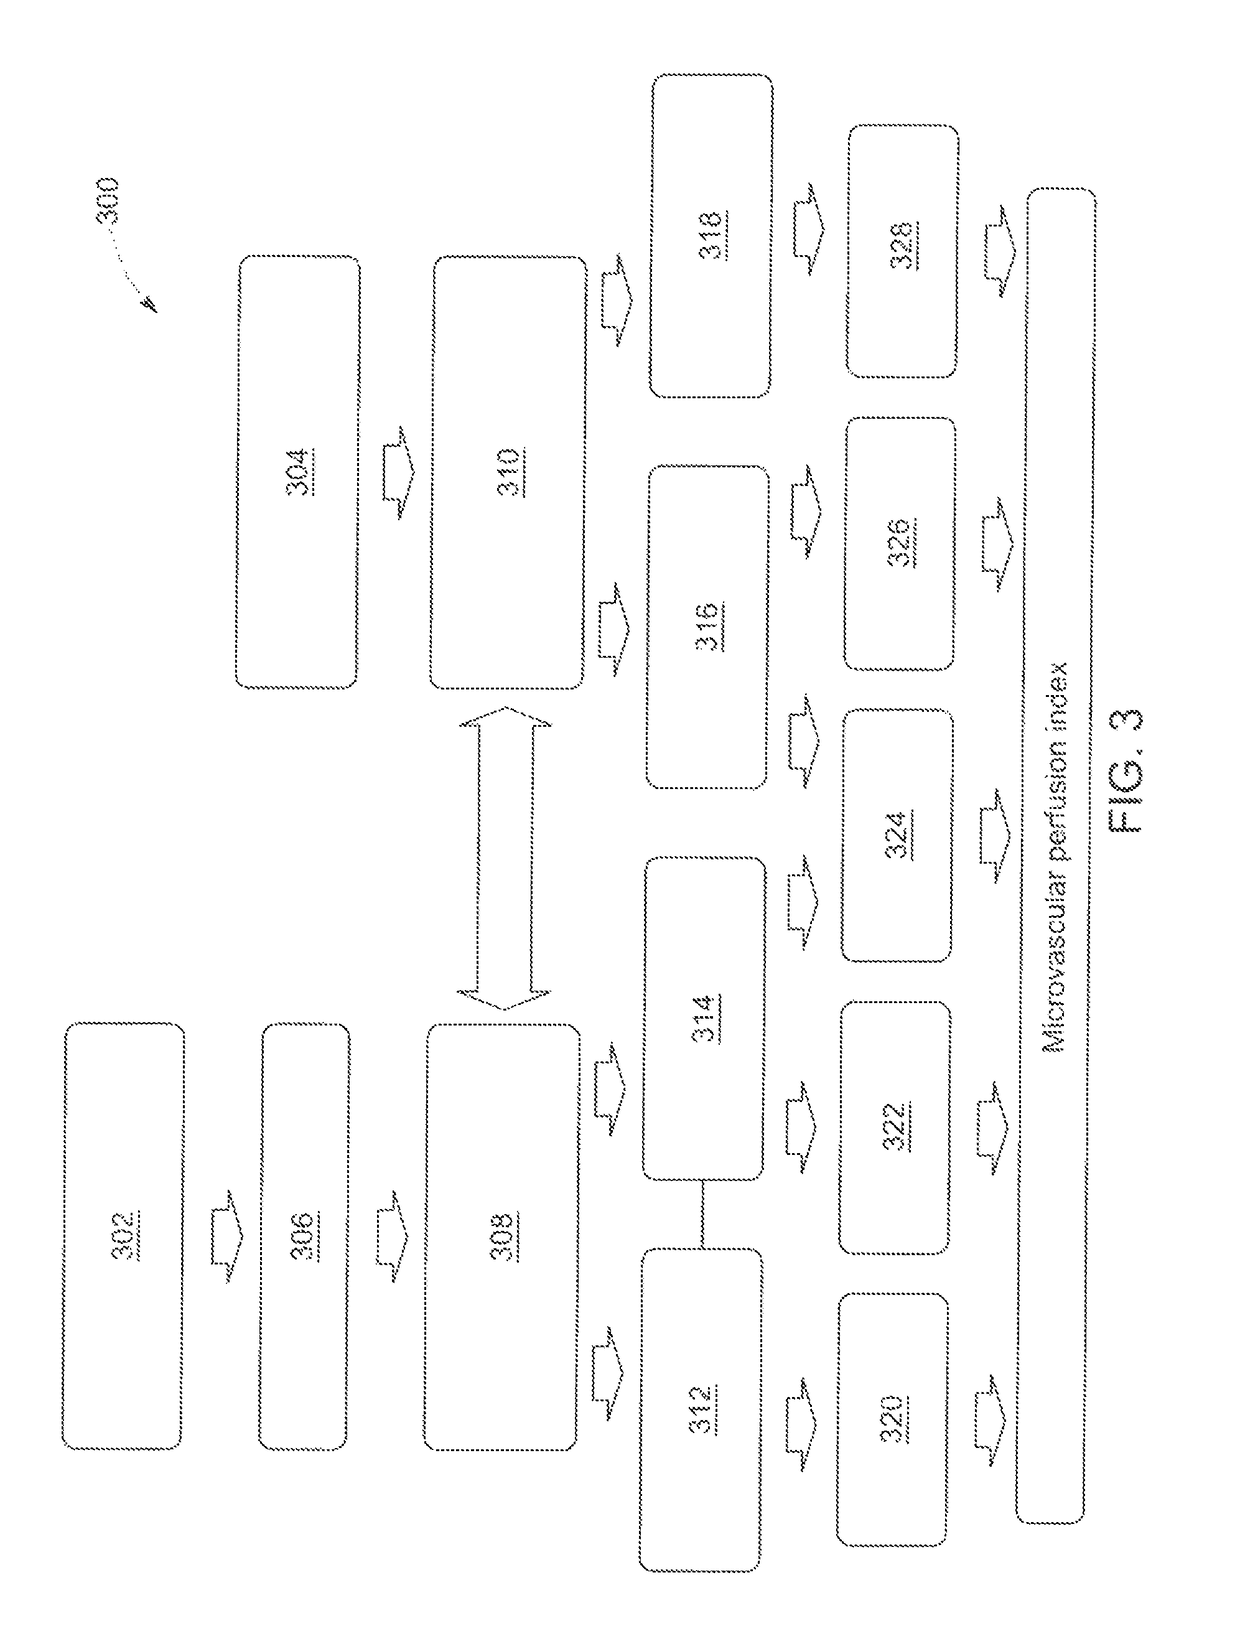 Systems and methods for quantitative microcirculation state monitoring